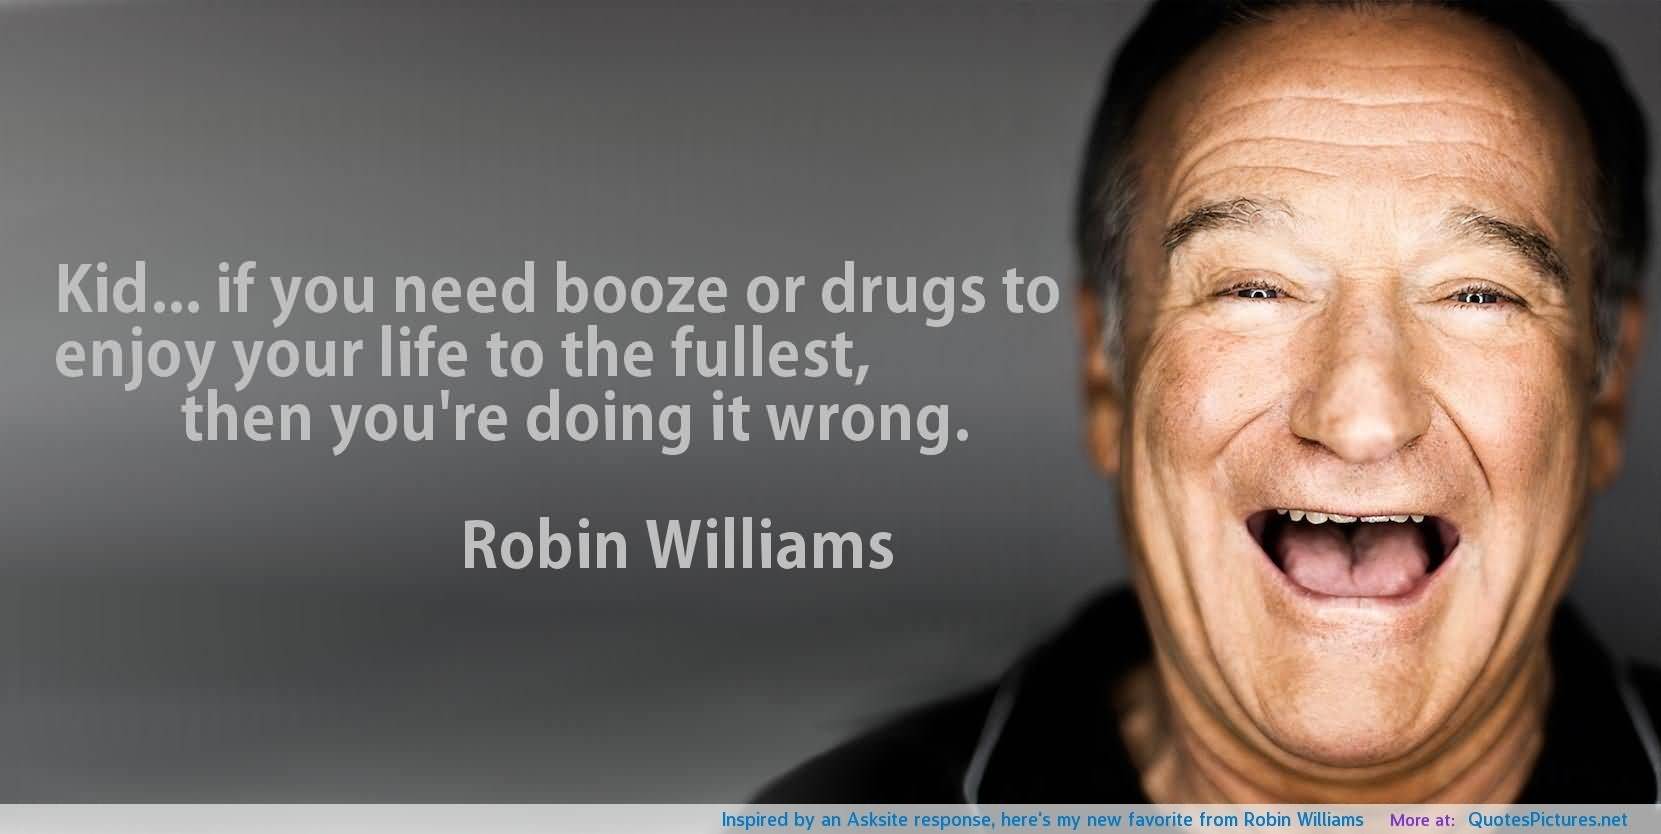 Robin Williams Quotes About Life Meme Image 18